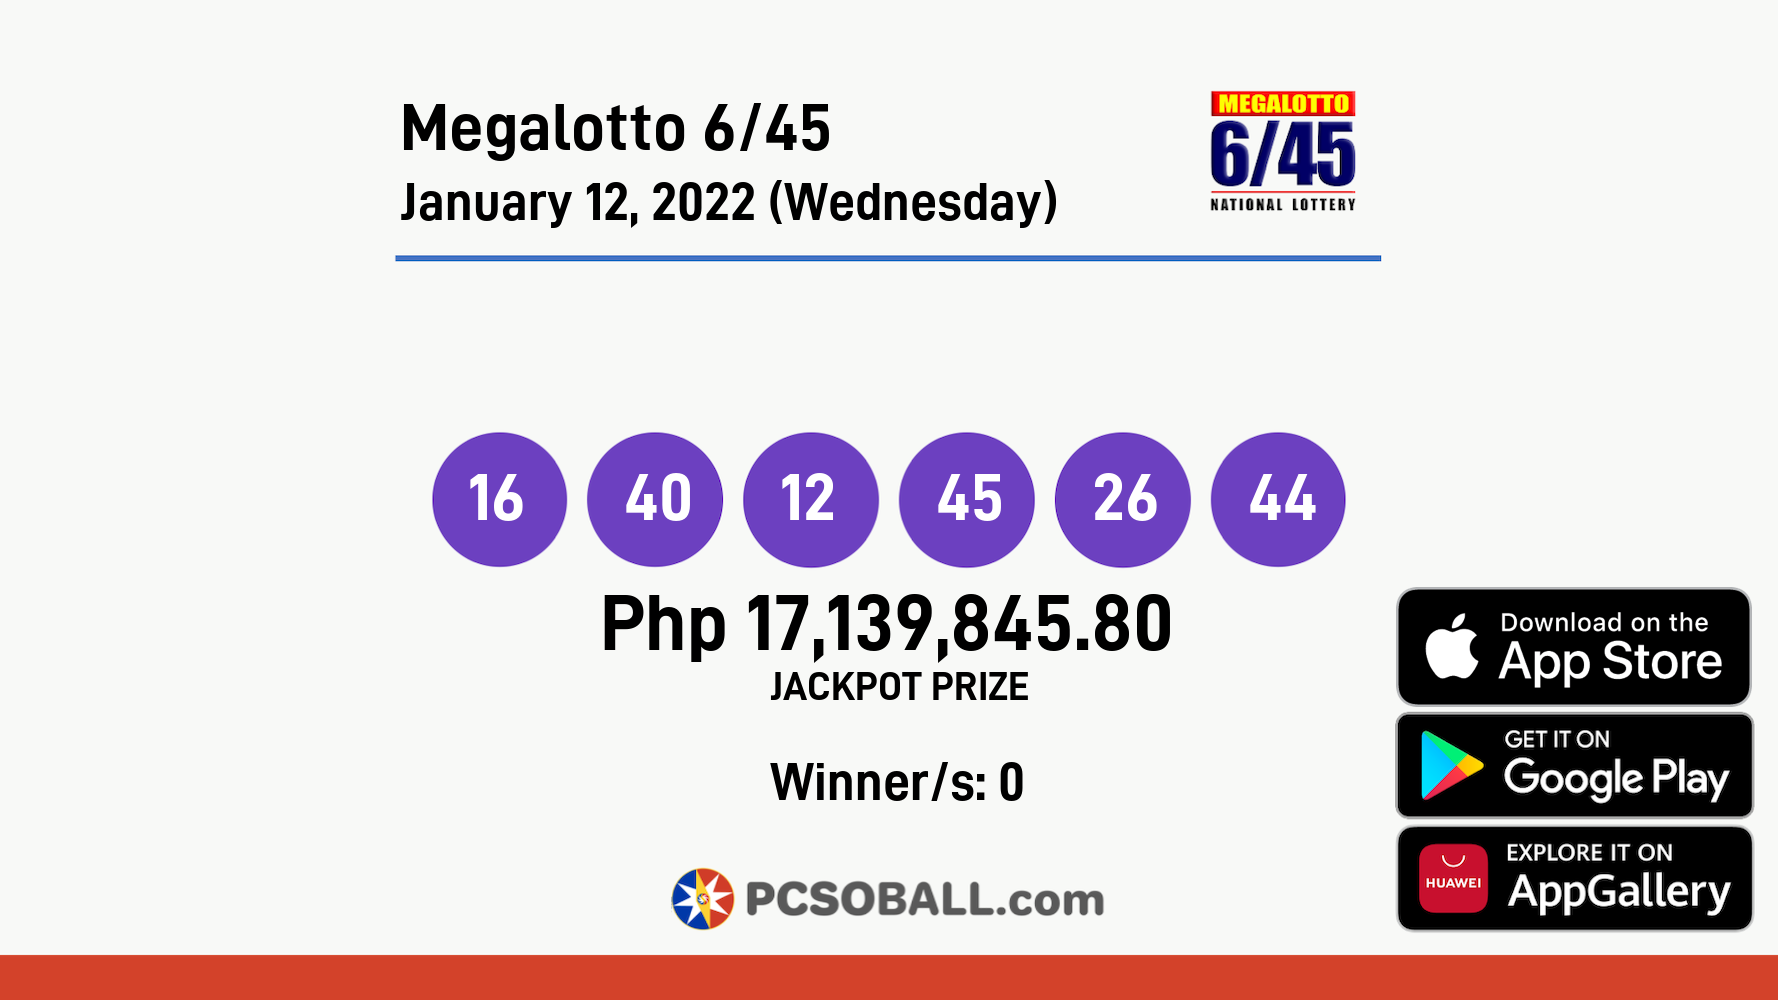 Megalotto 6/45 January 12, 2022 (Wednesday) Result